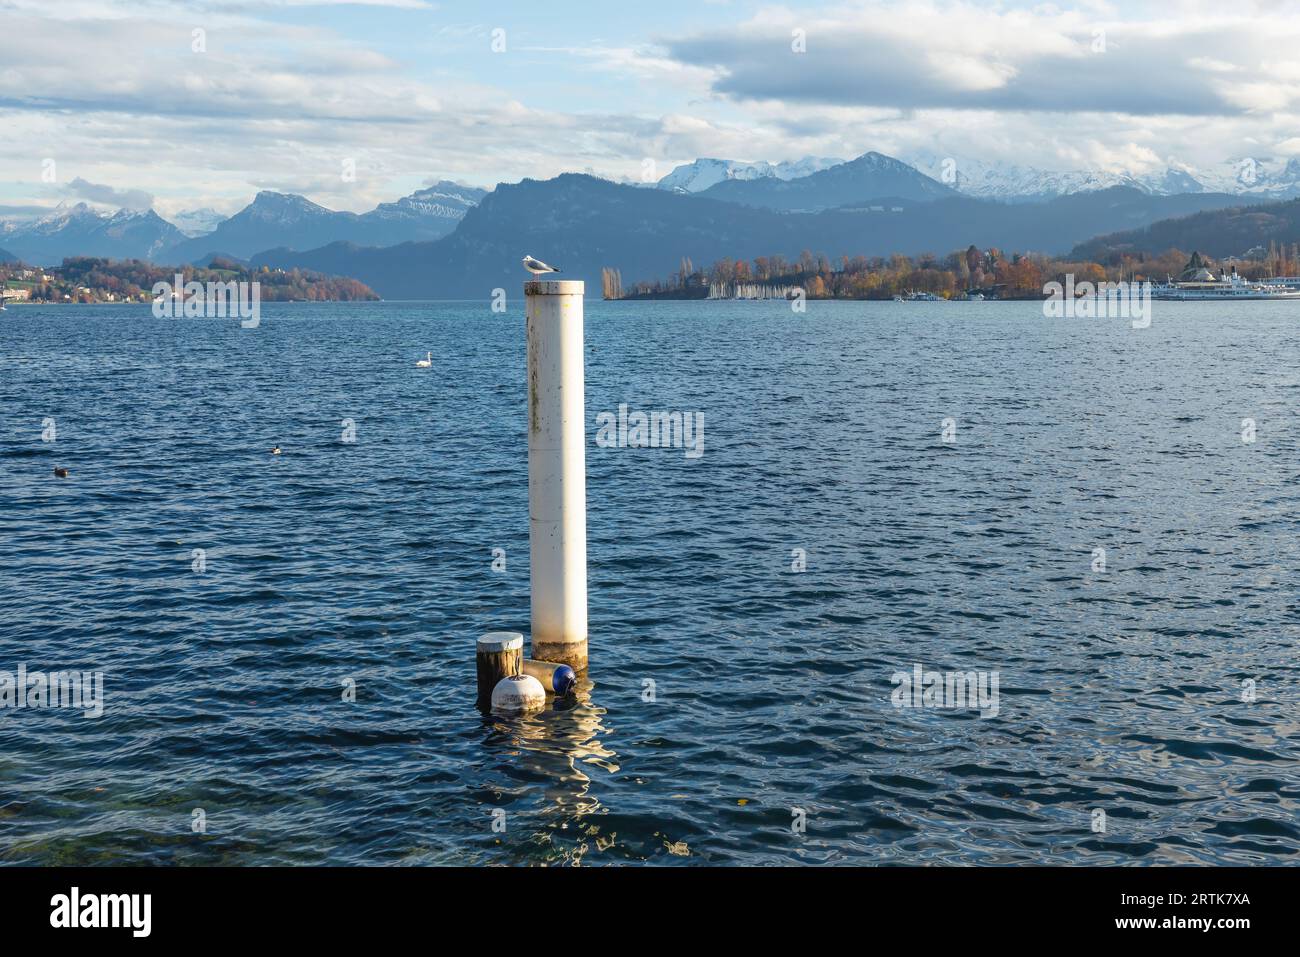 Swiss Alps view with Lake Lucerne - Lucerne, Switzerland Stock Photo